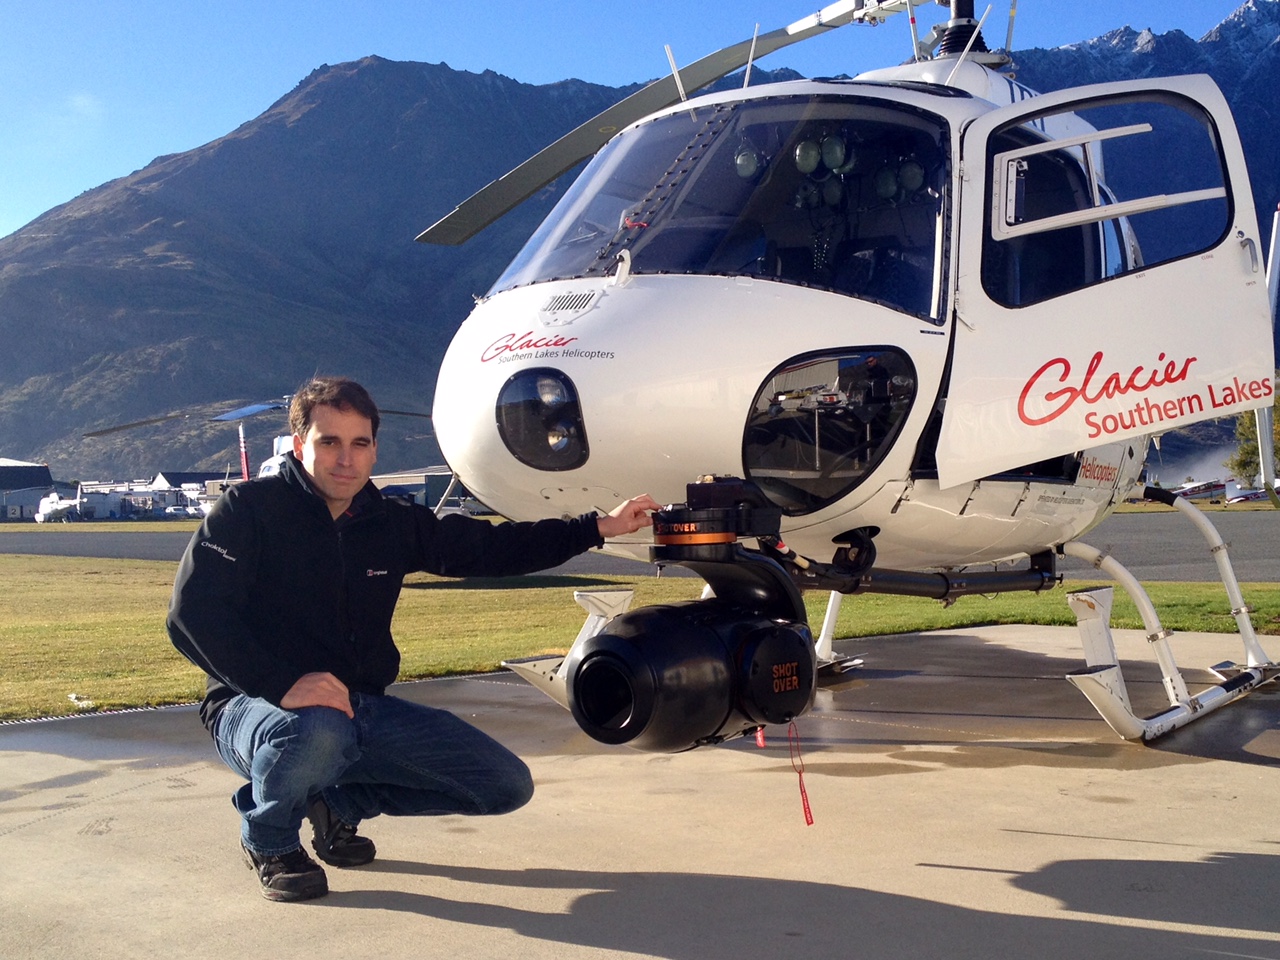 ShotOver training in New Zealand